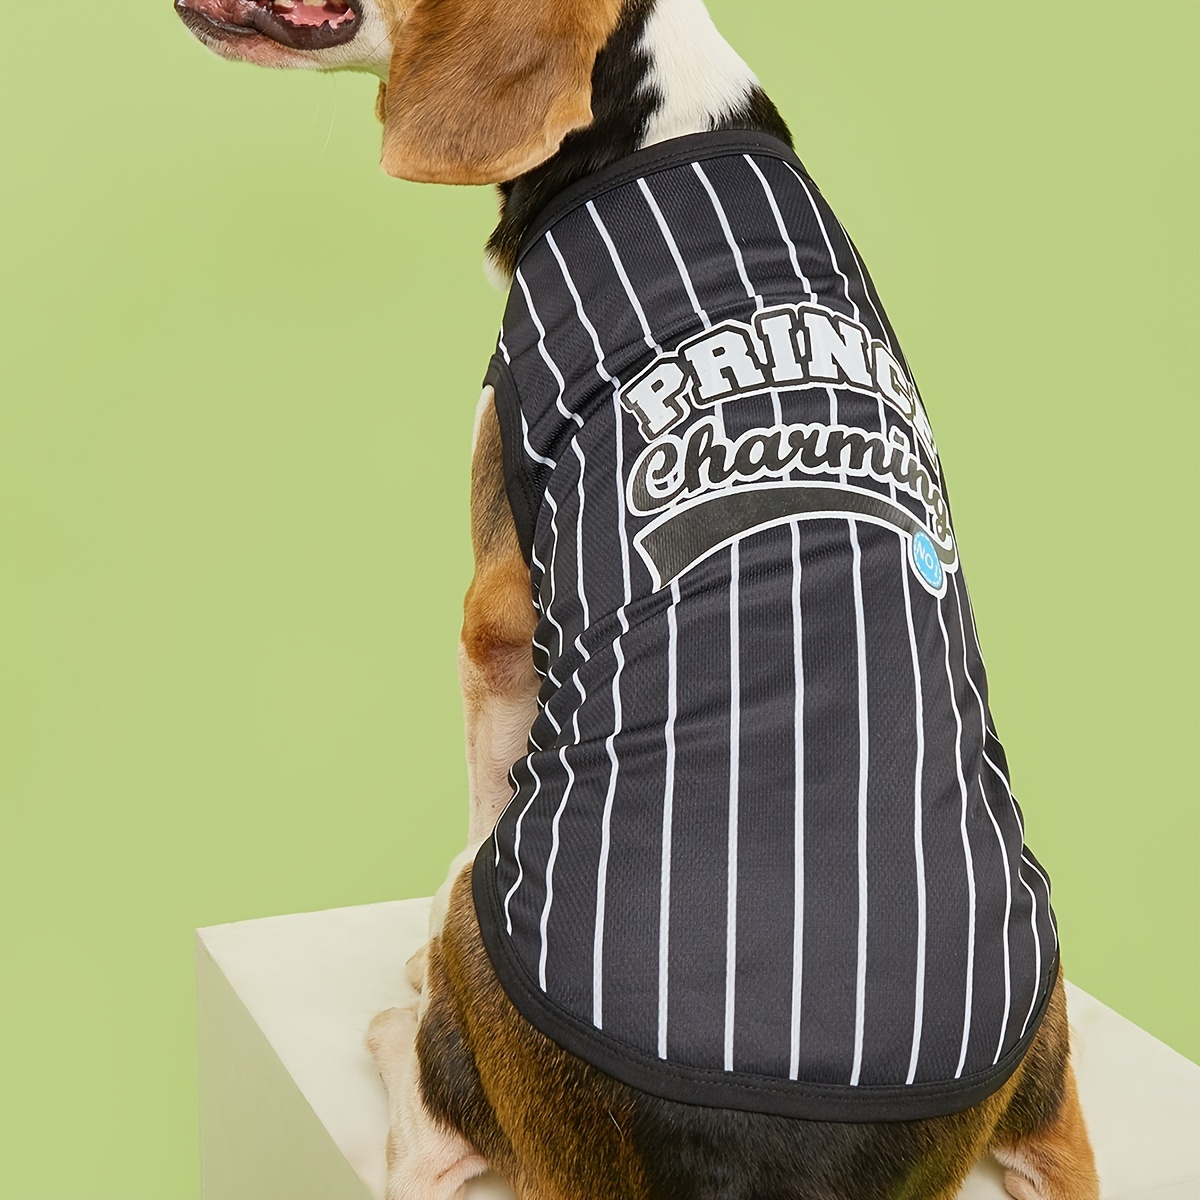 Stay Cool This Summer: Stylish Pet Vests For Dogs & Cats Of All